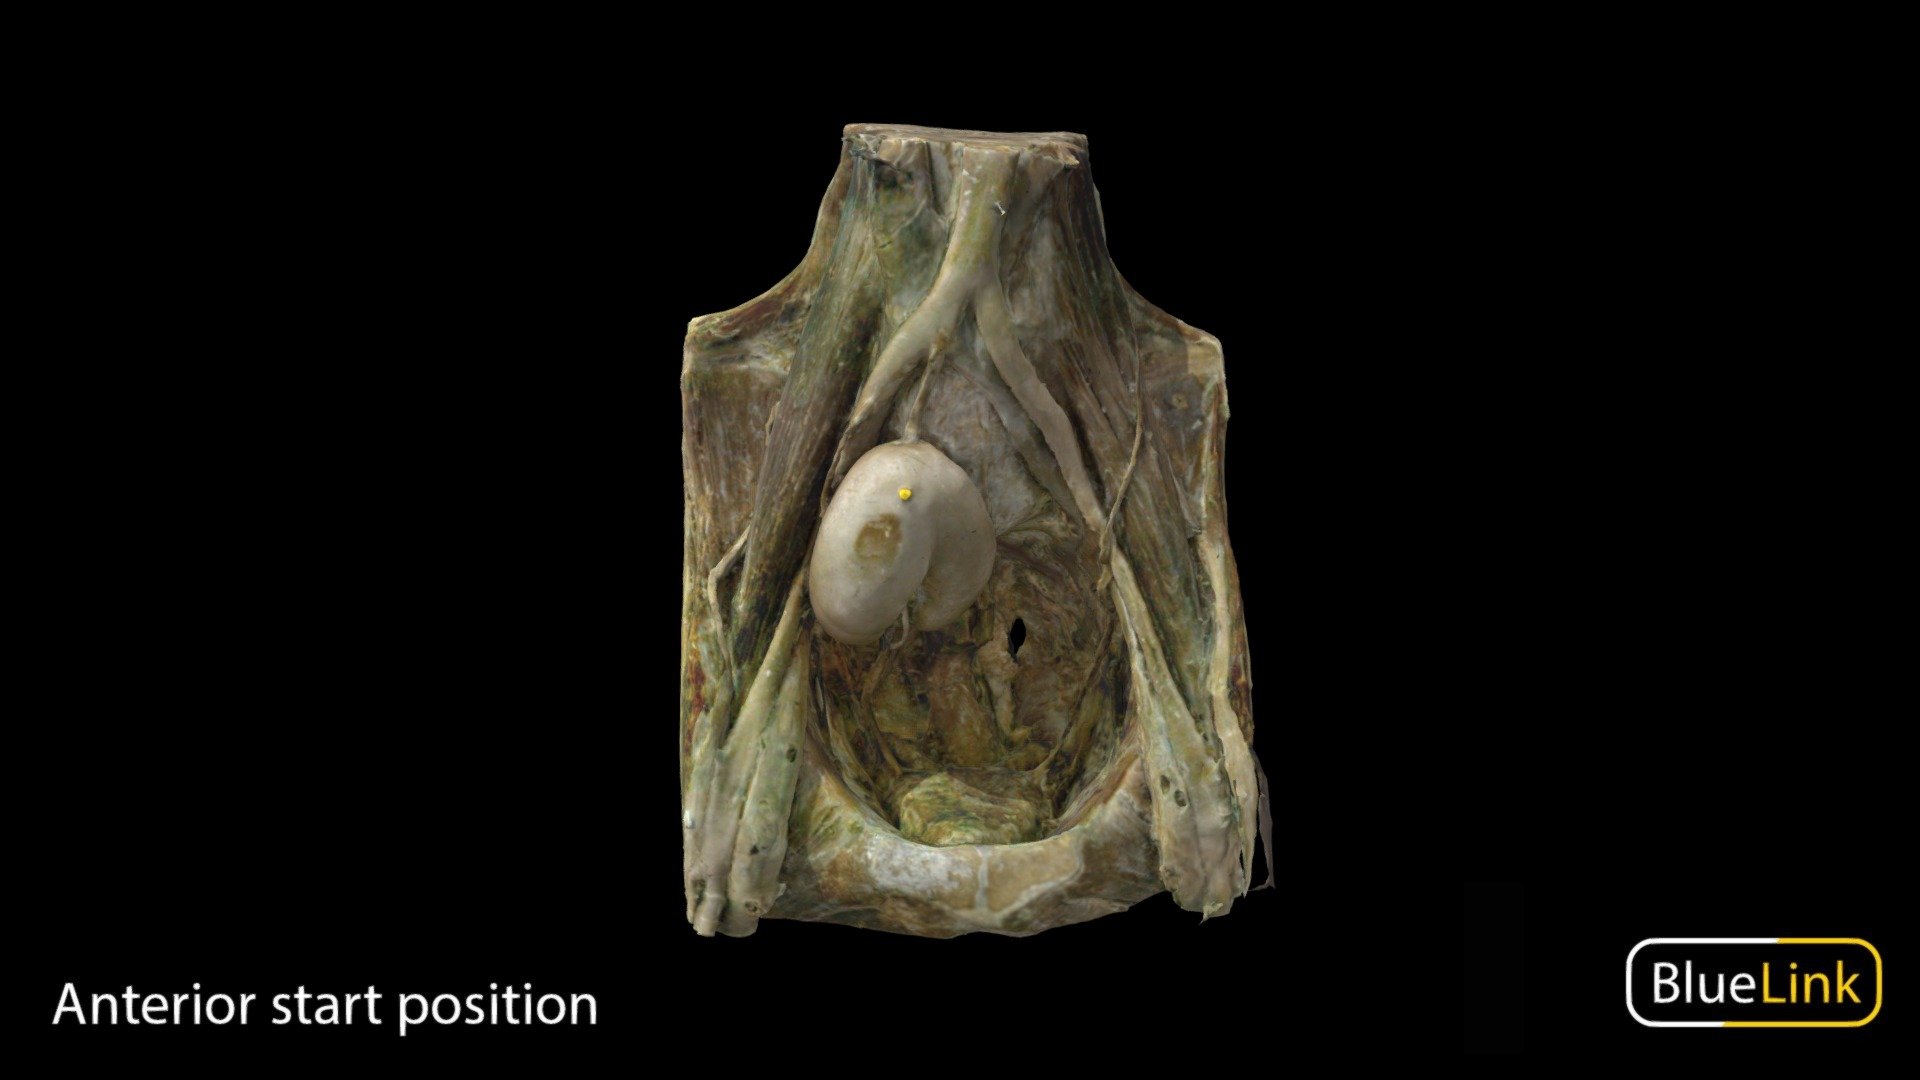 3D scan of an Ectopic Kidney

Captured with Einscan Pro

Captured and edited by: Will Gribbin

Copyright2019 BK Alsup &amp; GM Fox

ID 90000-P01 - Ectopic Kidney - 3D model by Bluelink Anatomy - University of Michigan (@bluelinkanatomy) 3d model